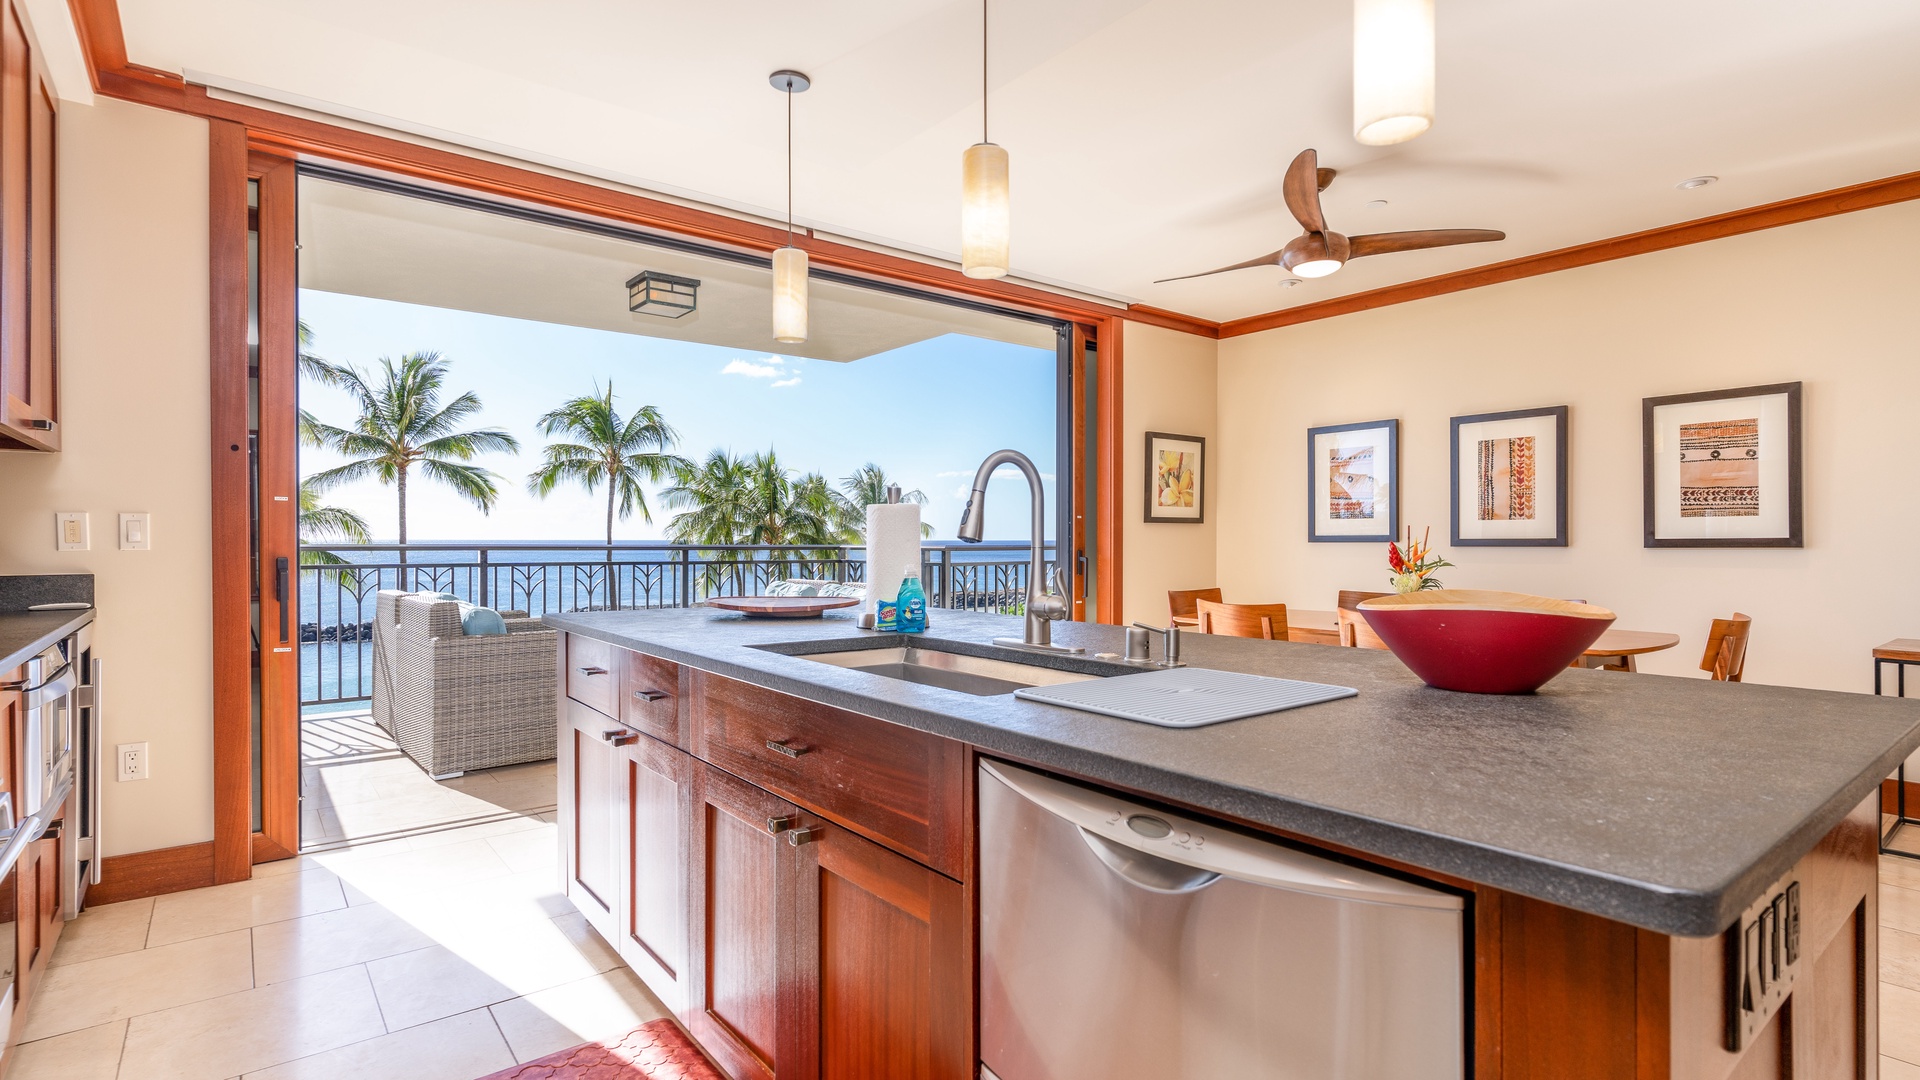 Kapolei Vacation Rentals, Ko Olina Beach Villas B309 - The kitchen is equipped with stainless steel appliances for your culinary adventures.